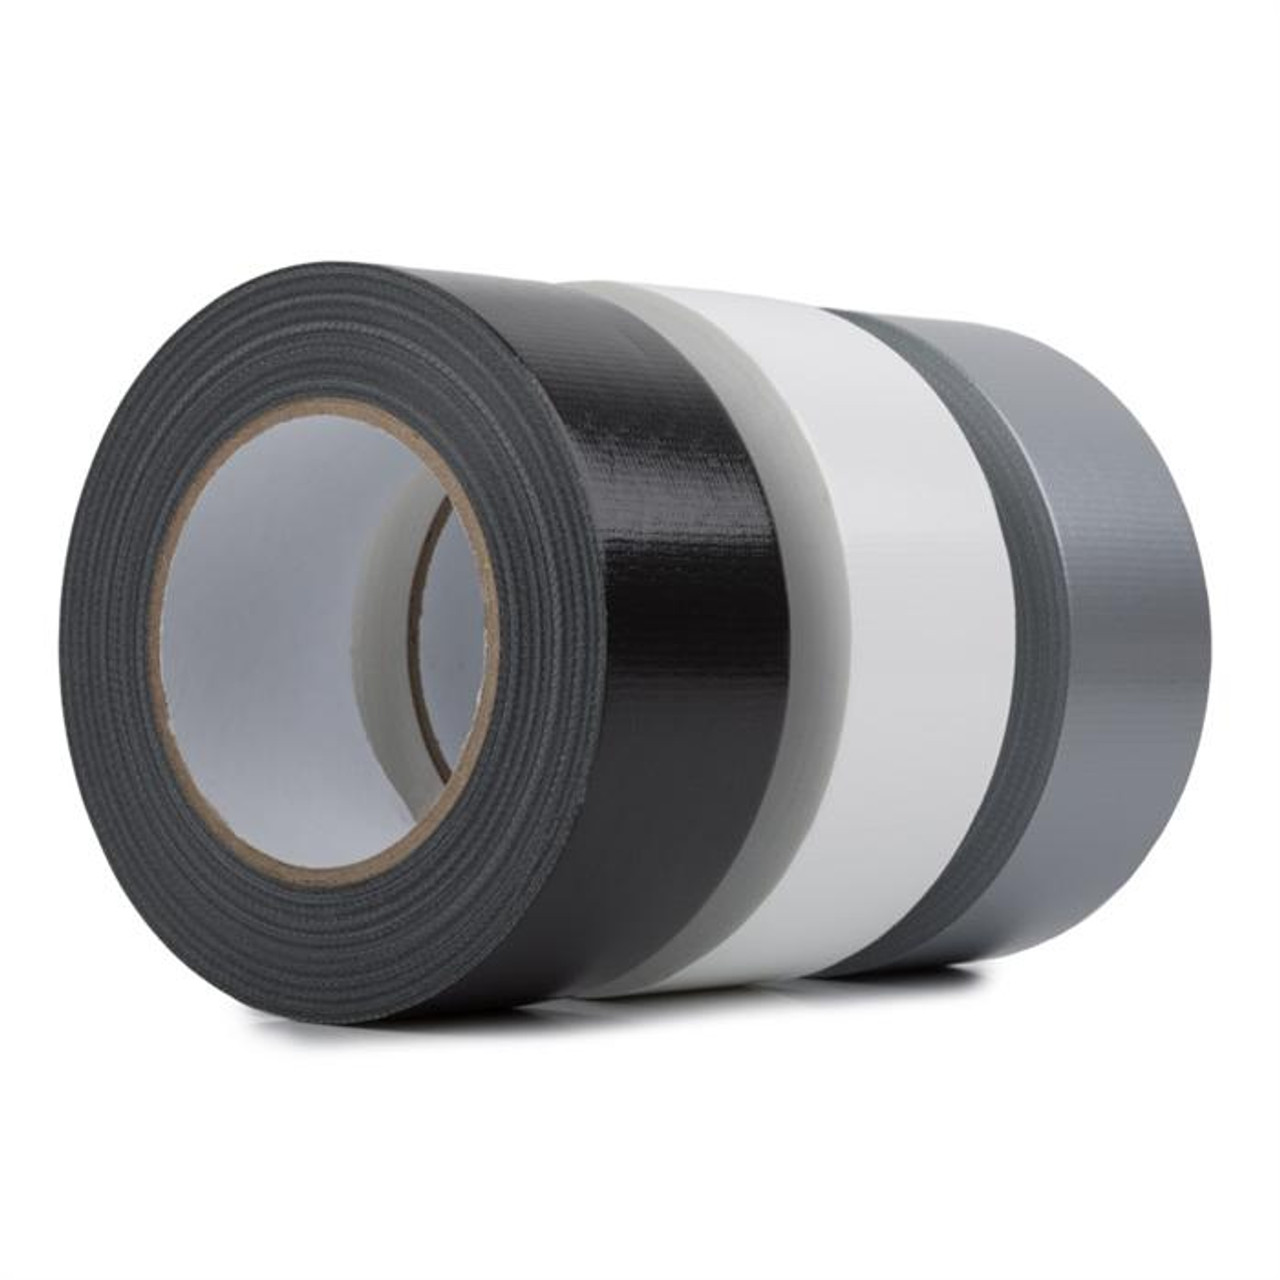 Multi-Purpose Duct Tape, 20% Off with Bulk Buy